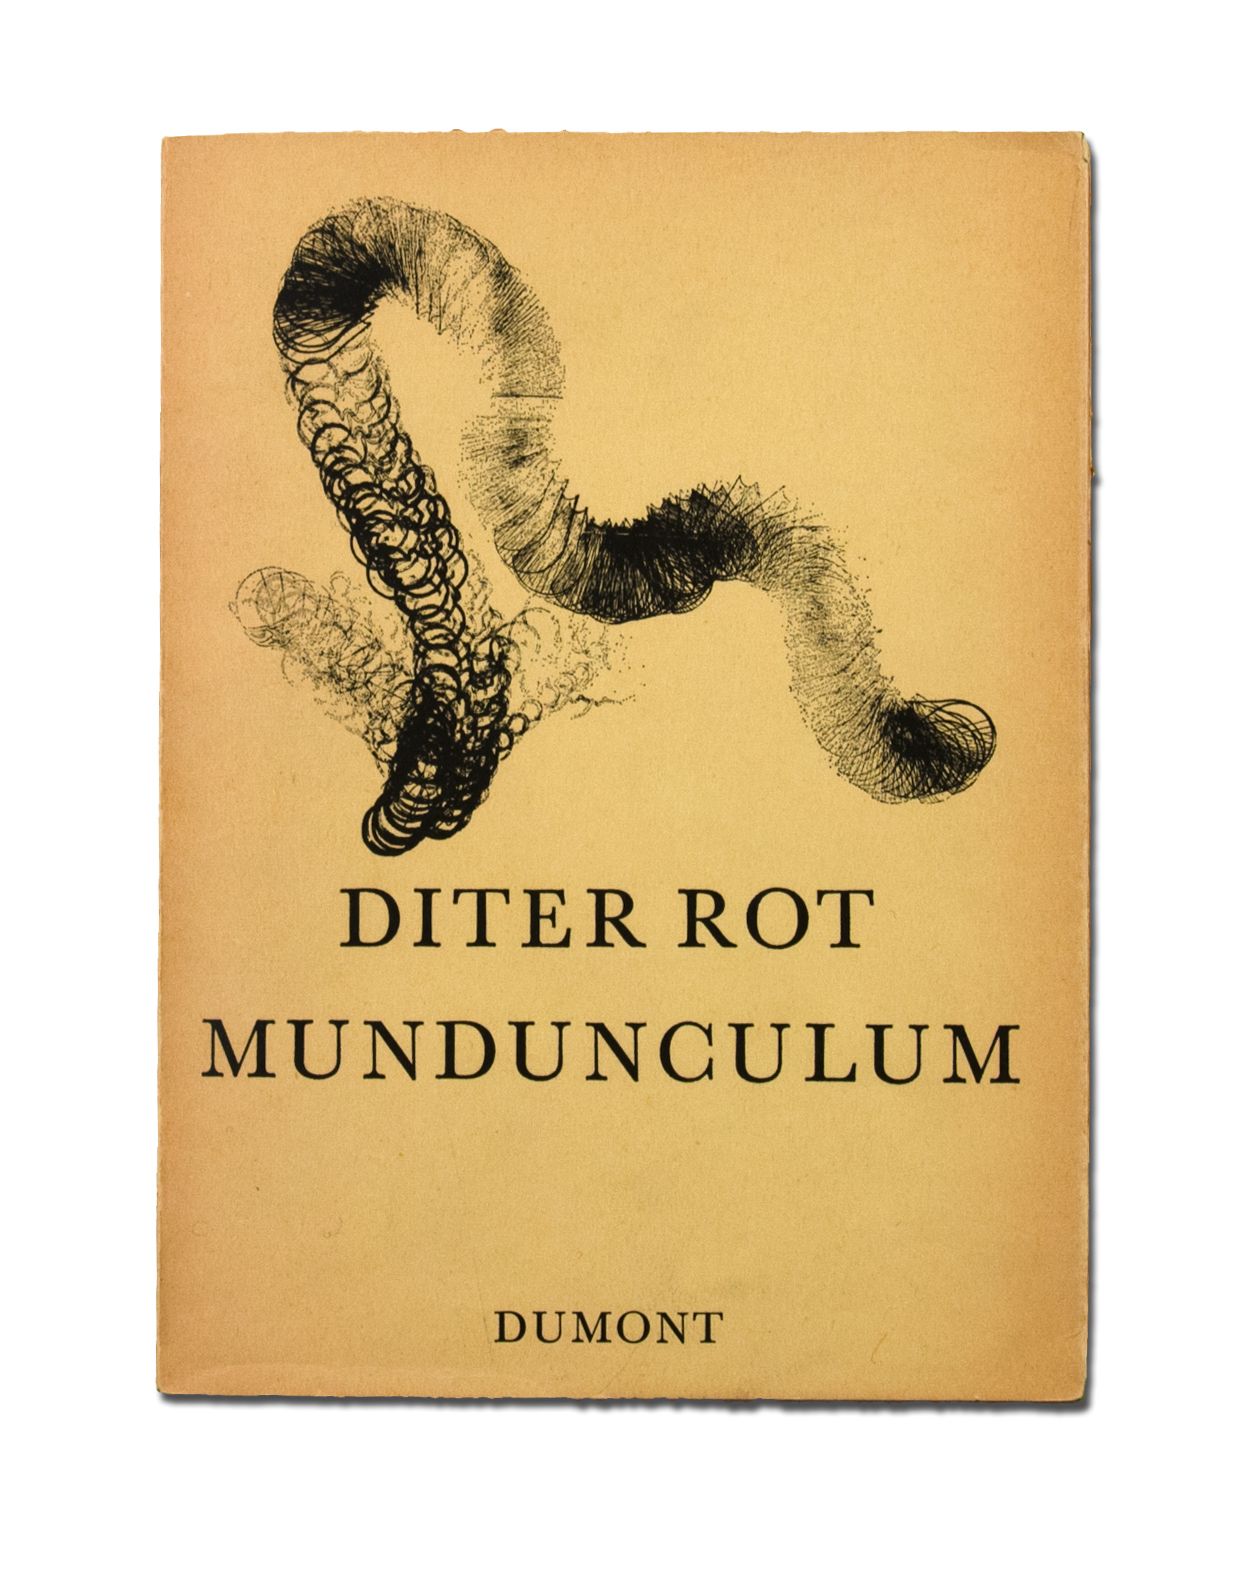 Dieter-Roth-Mundunculum<RETURN>A-tentative-logico-poeticum-represented-as-a-plan-and-program-or-dream-for-a-provisional-mytherbarium-for-visionary-plants.-VOLUME-1-Rot's-VIDEUM.-1967